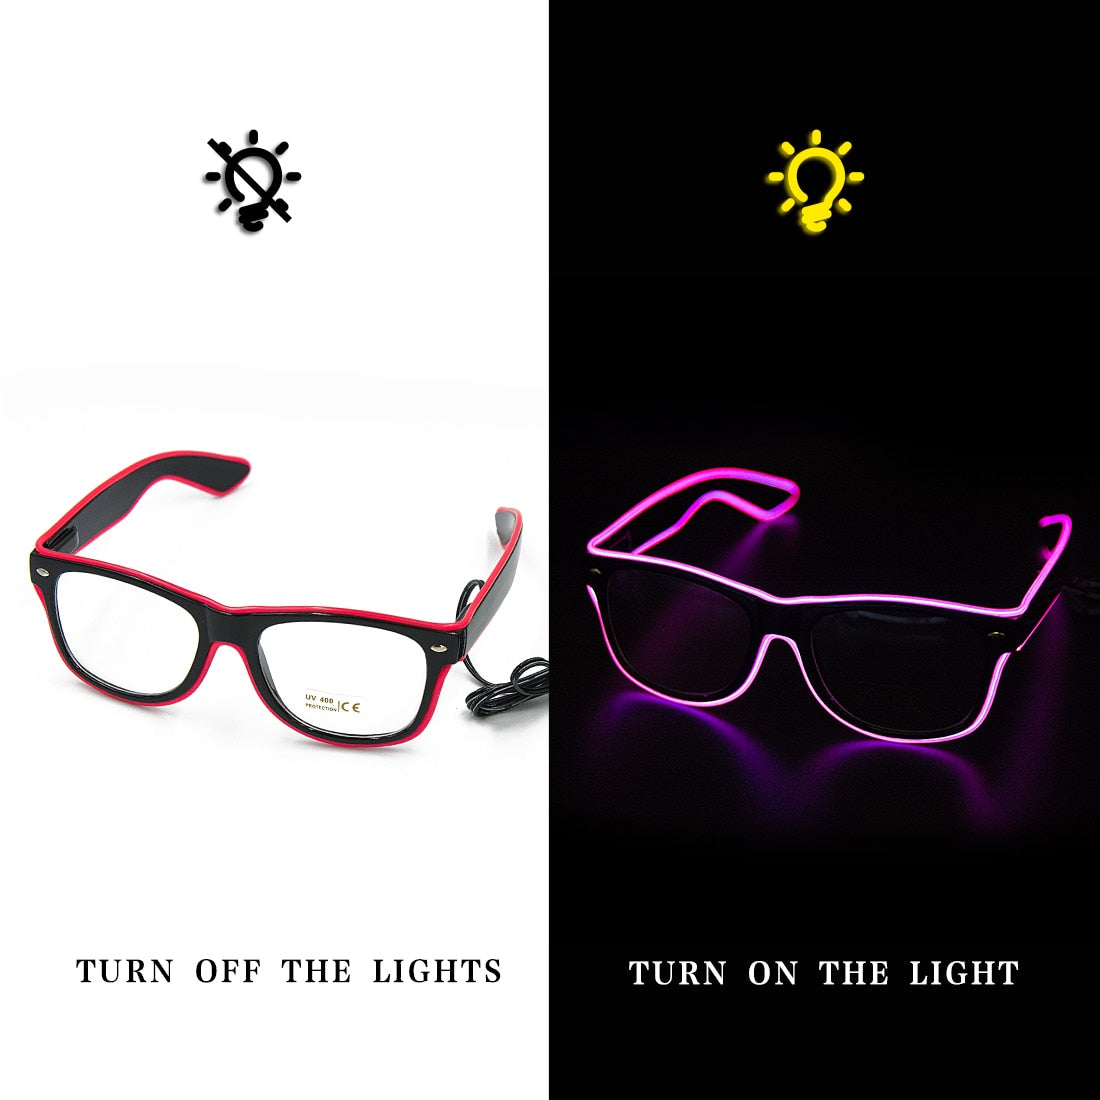 Led Glasses Neon Party Flashing Glasses EL Wire Glowing Gafas Luminous Bril Novelty Gift Glow Sunglasses Bright Light Supplies